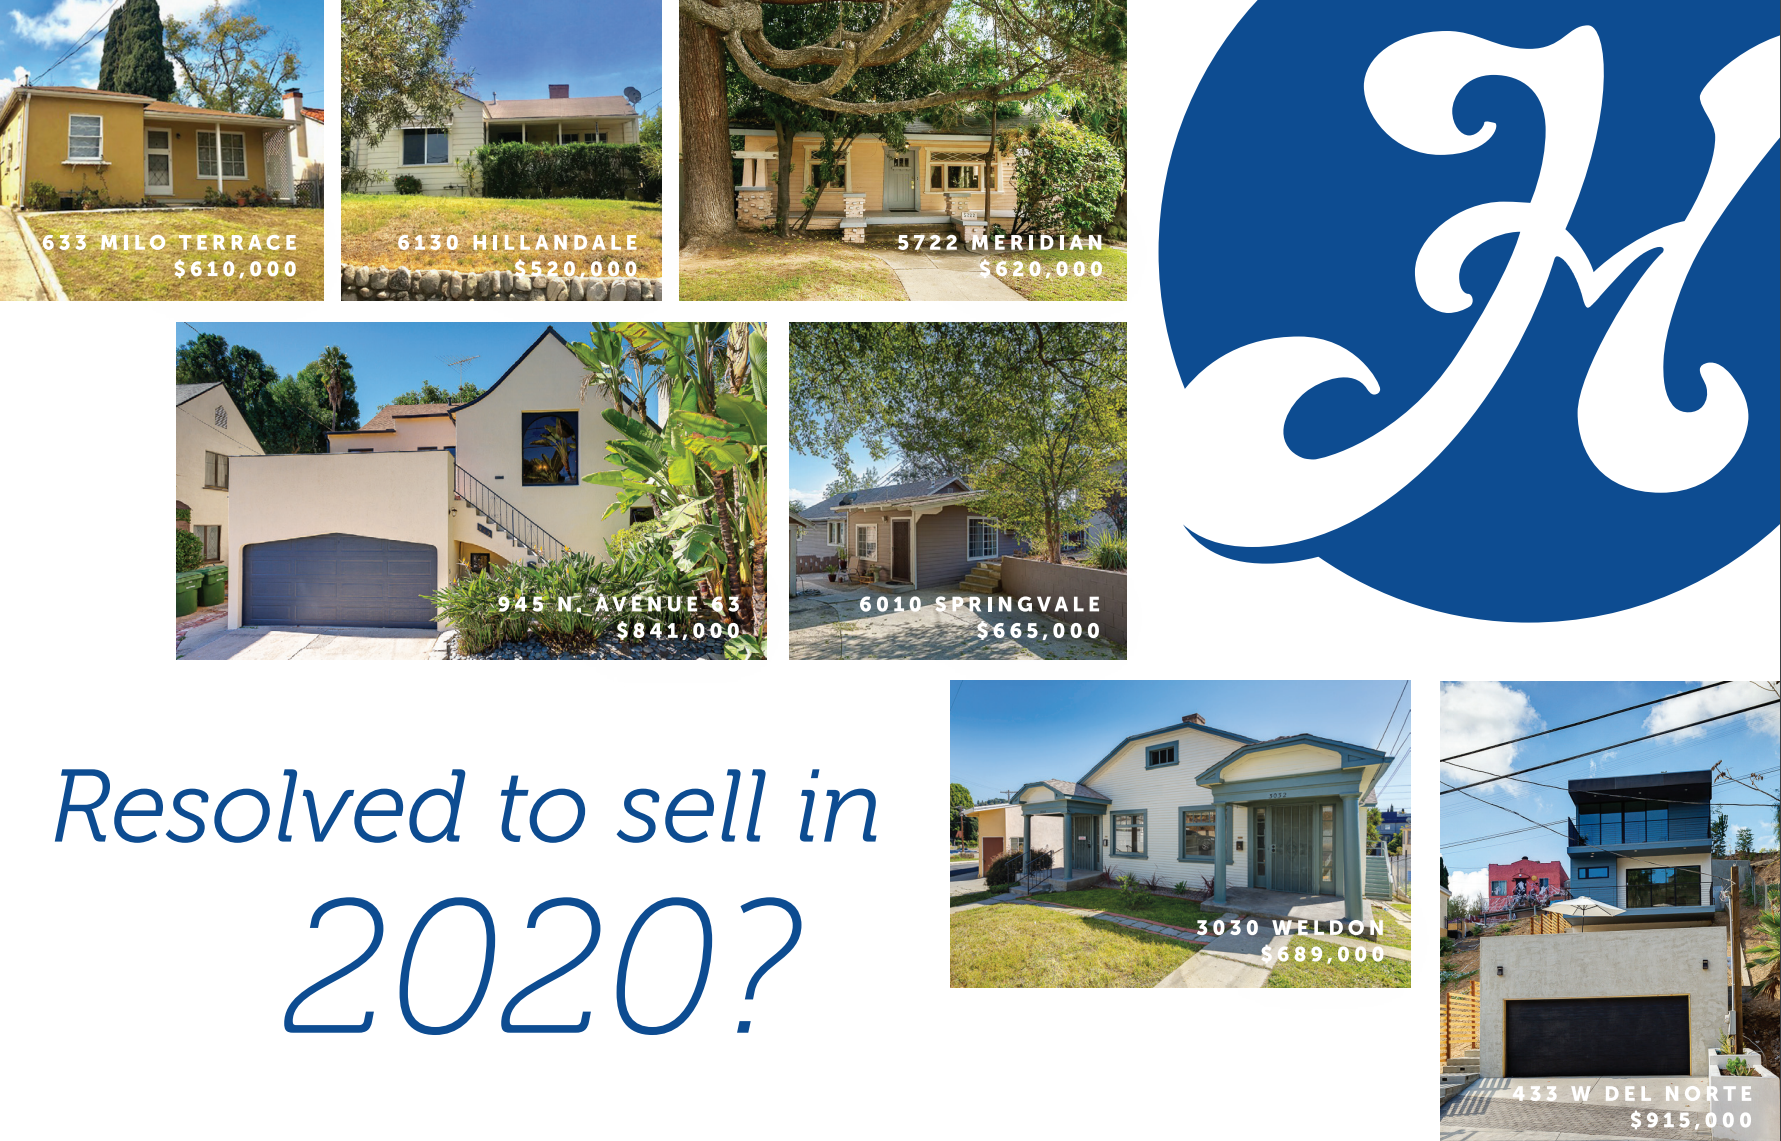 Thinking of Selling in 2020?